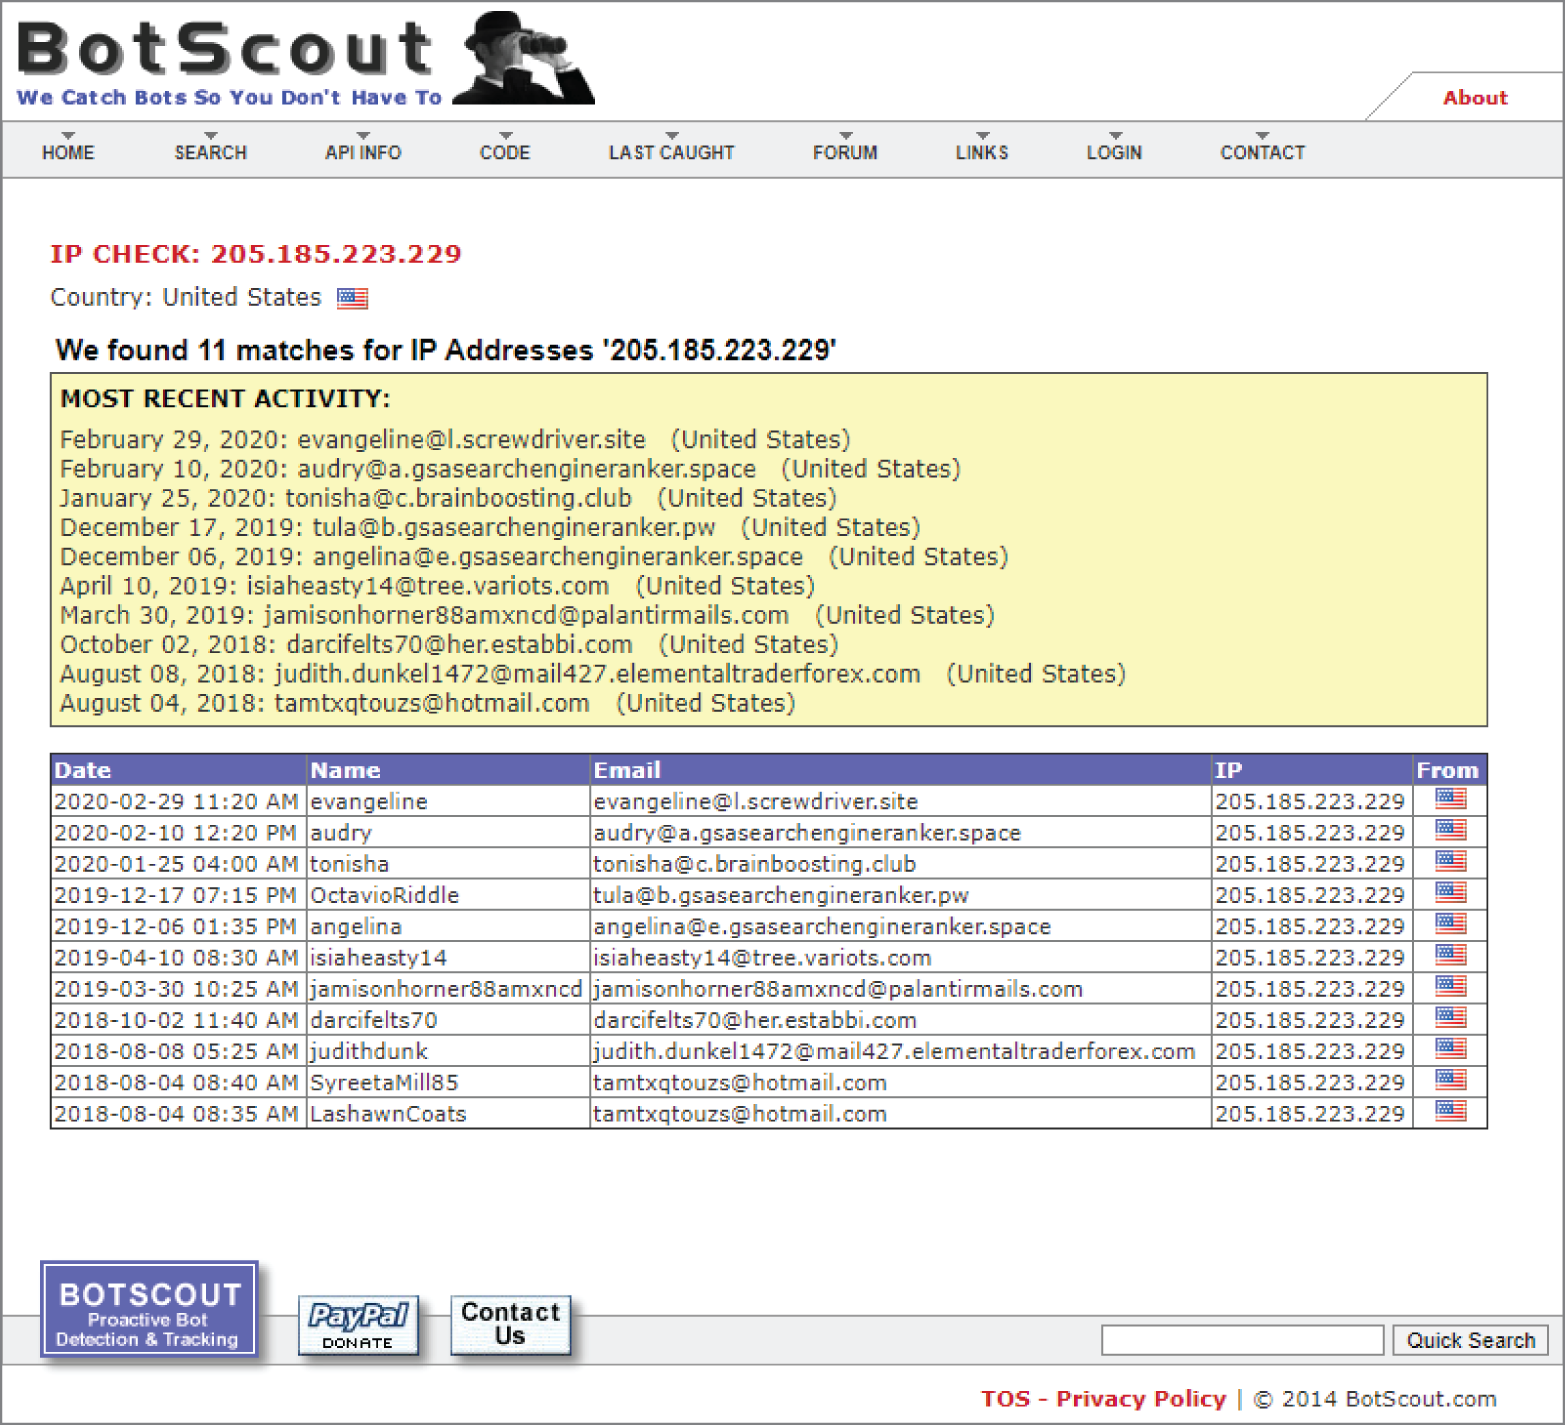 A window page of BotScout presents a table that exhibit the date, name, email, IP, and from data.